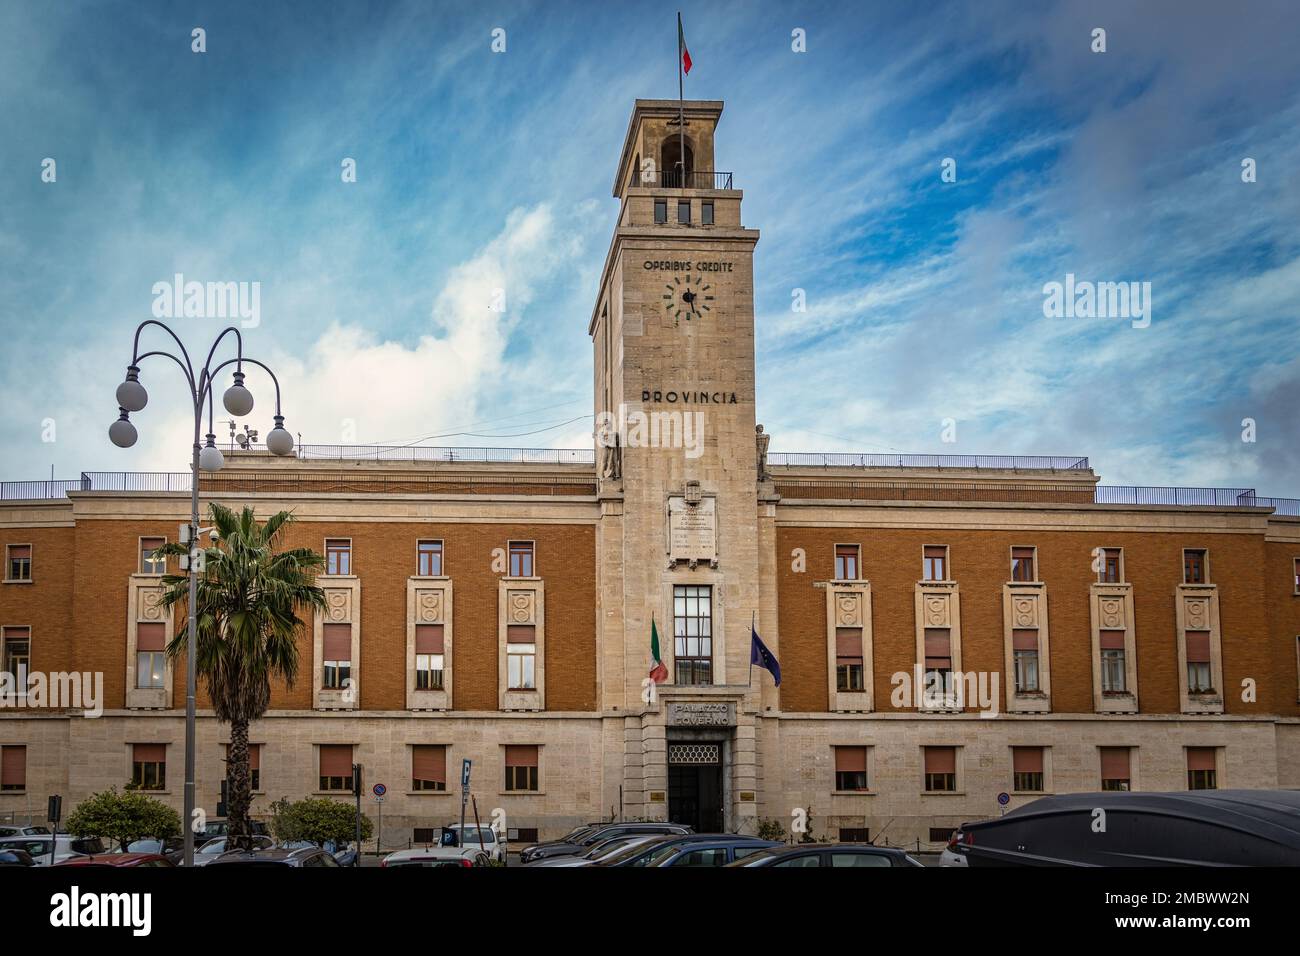 Palace of the prefecture of Enna, Building of fascist architecture or simplified neoclassicism, with particular architectural symbols of the regime. Stock Photo